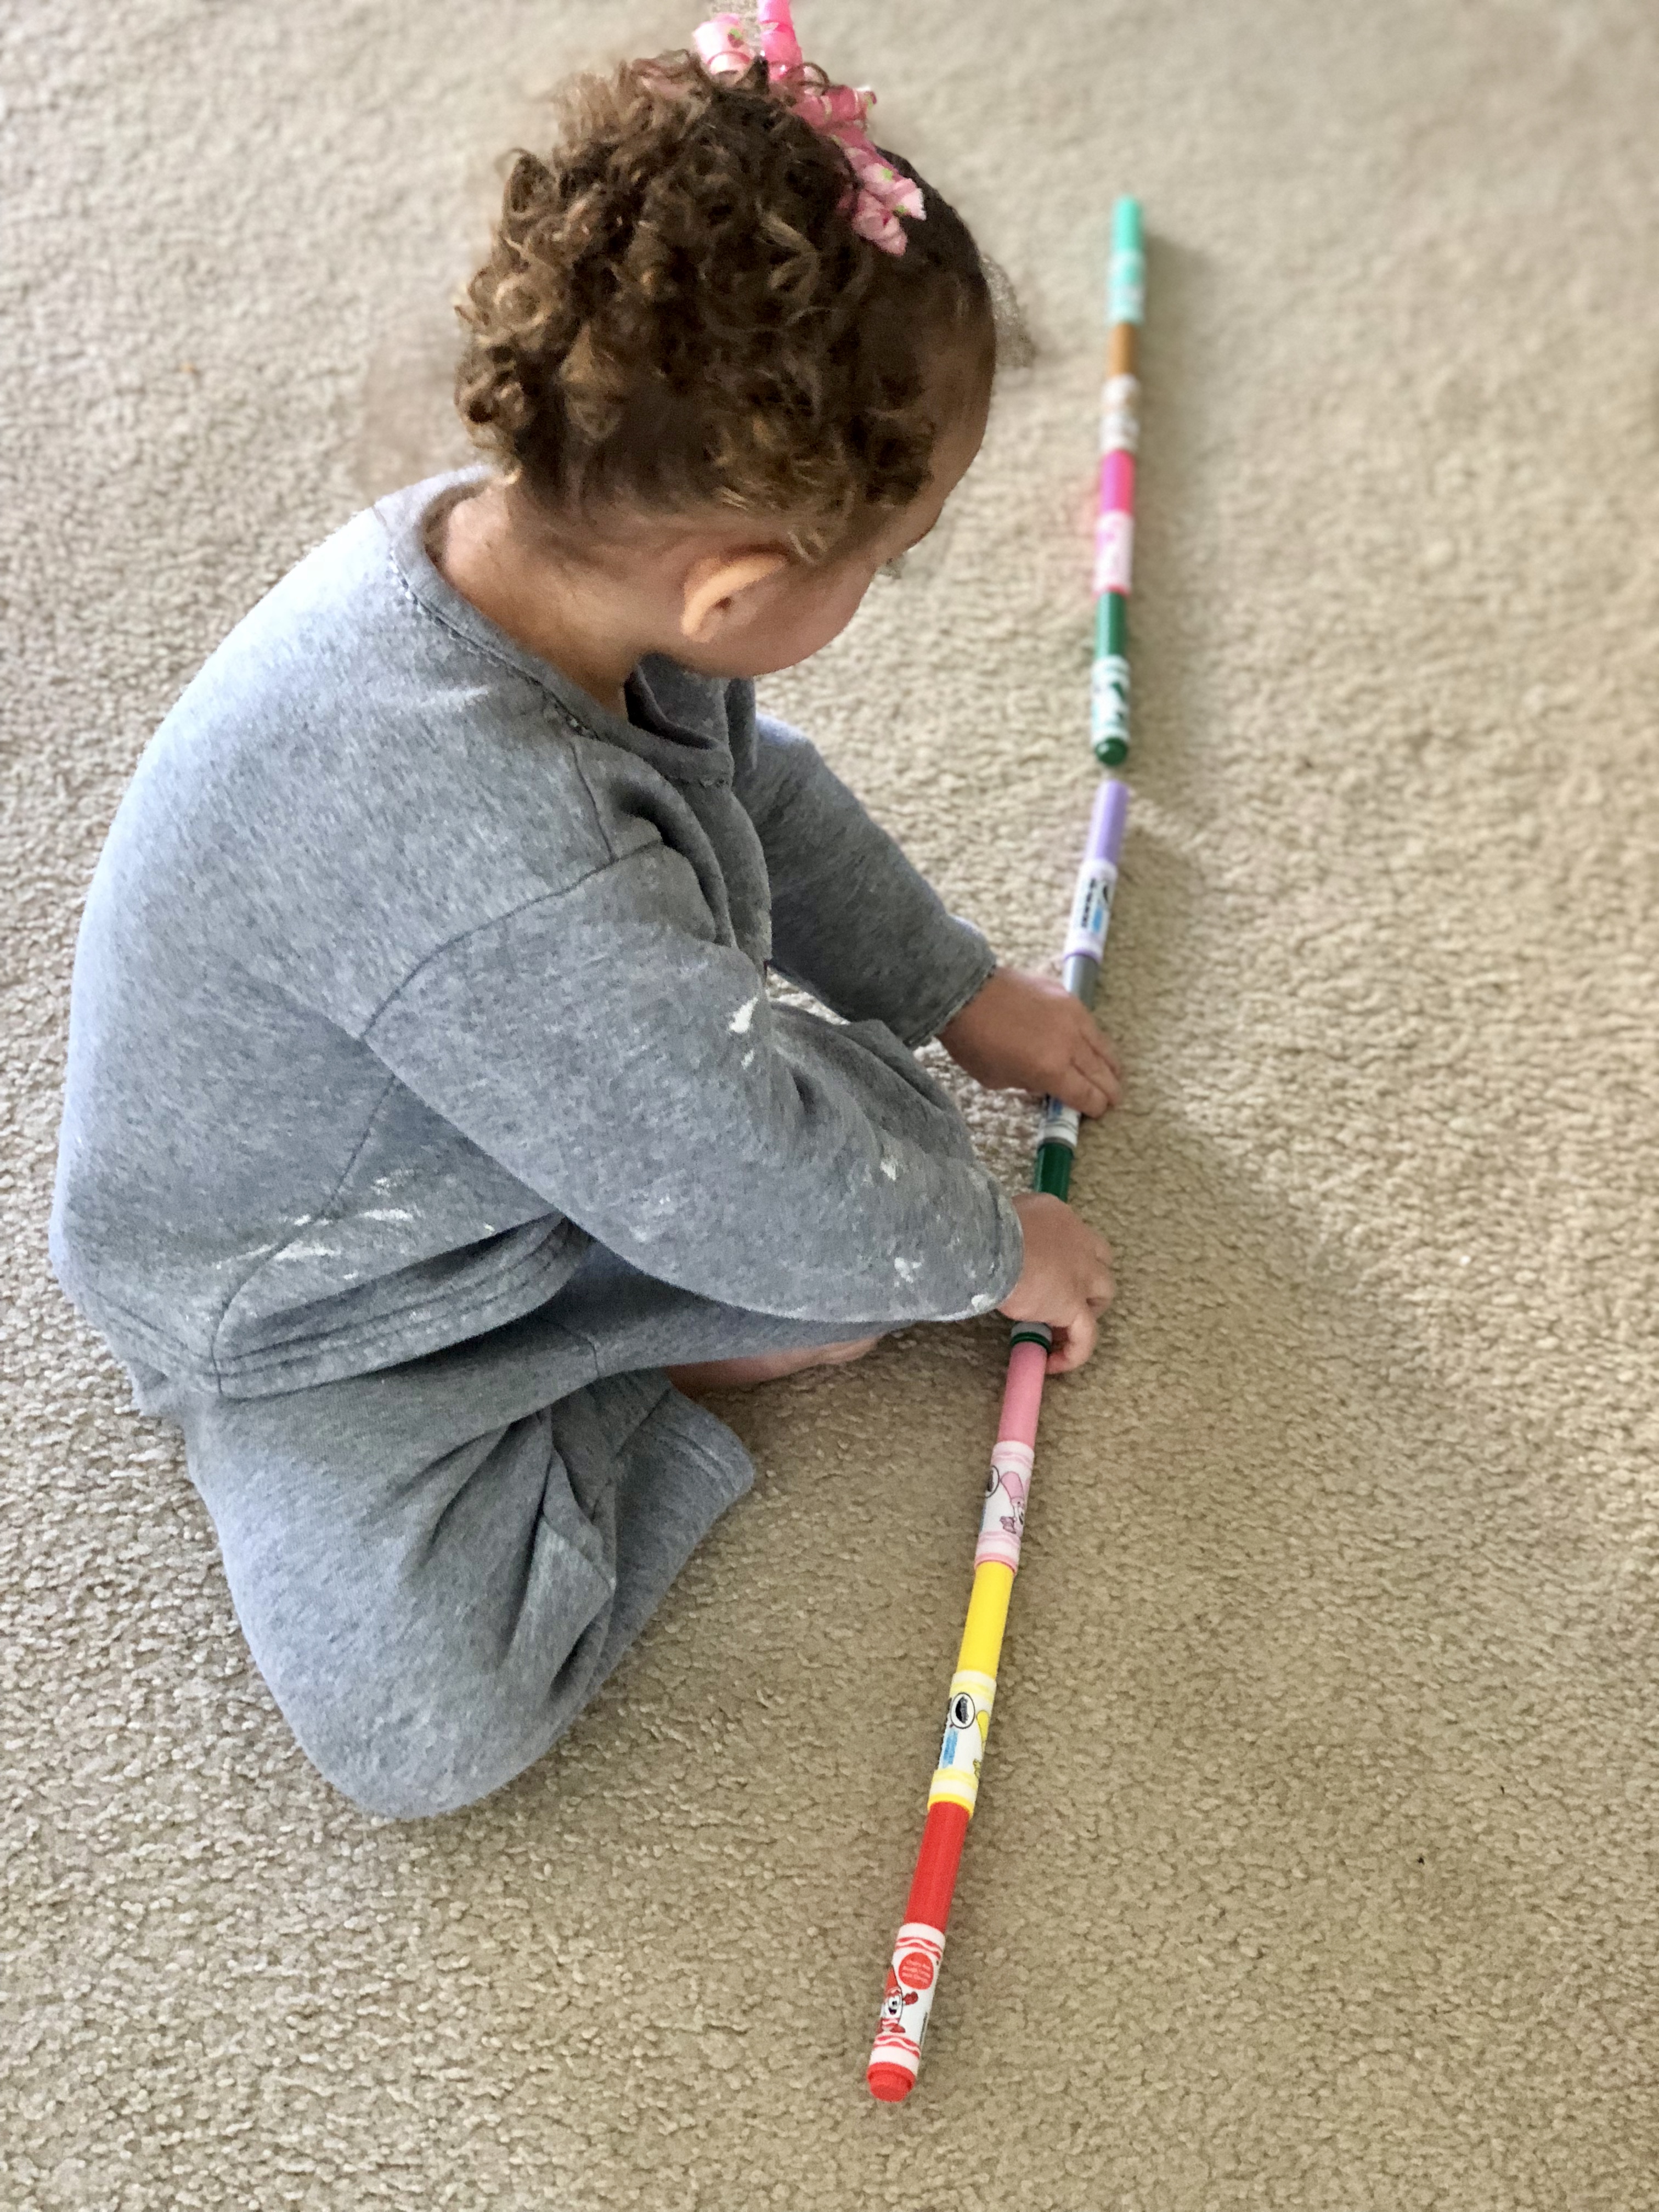 girl lining up markers and connecting them on the floor